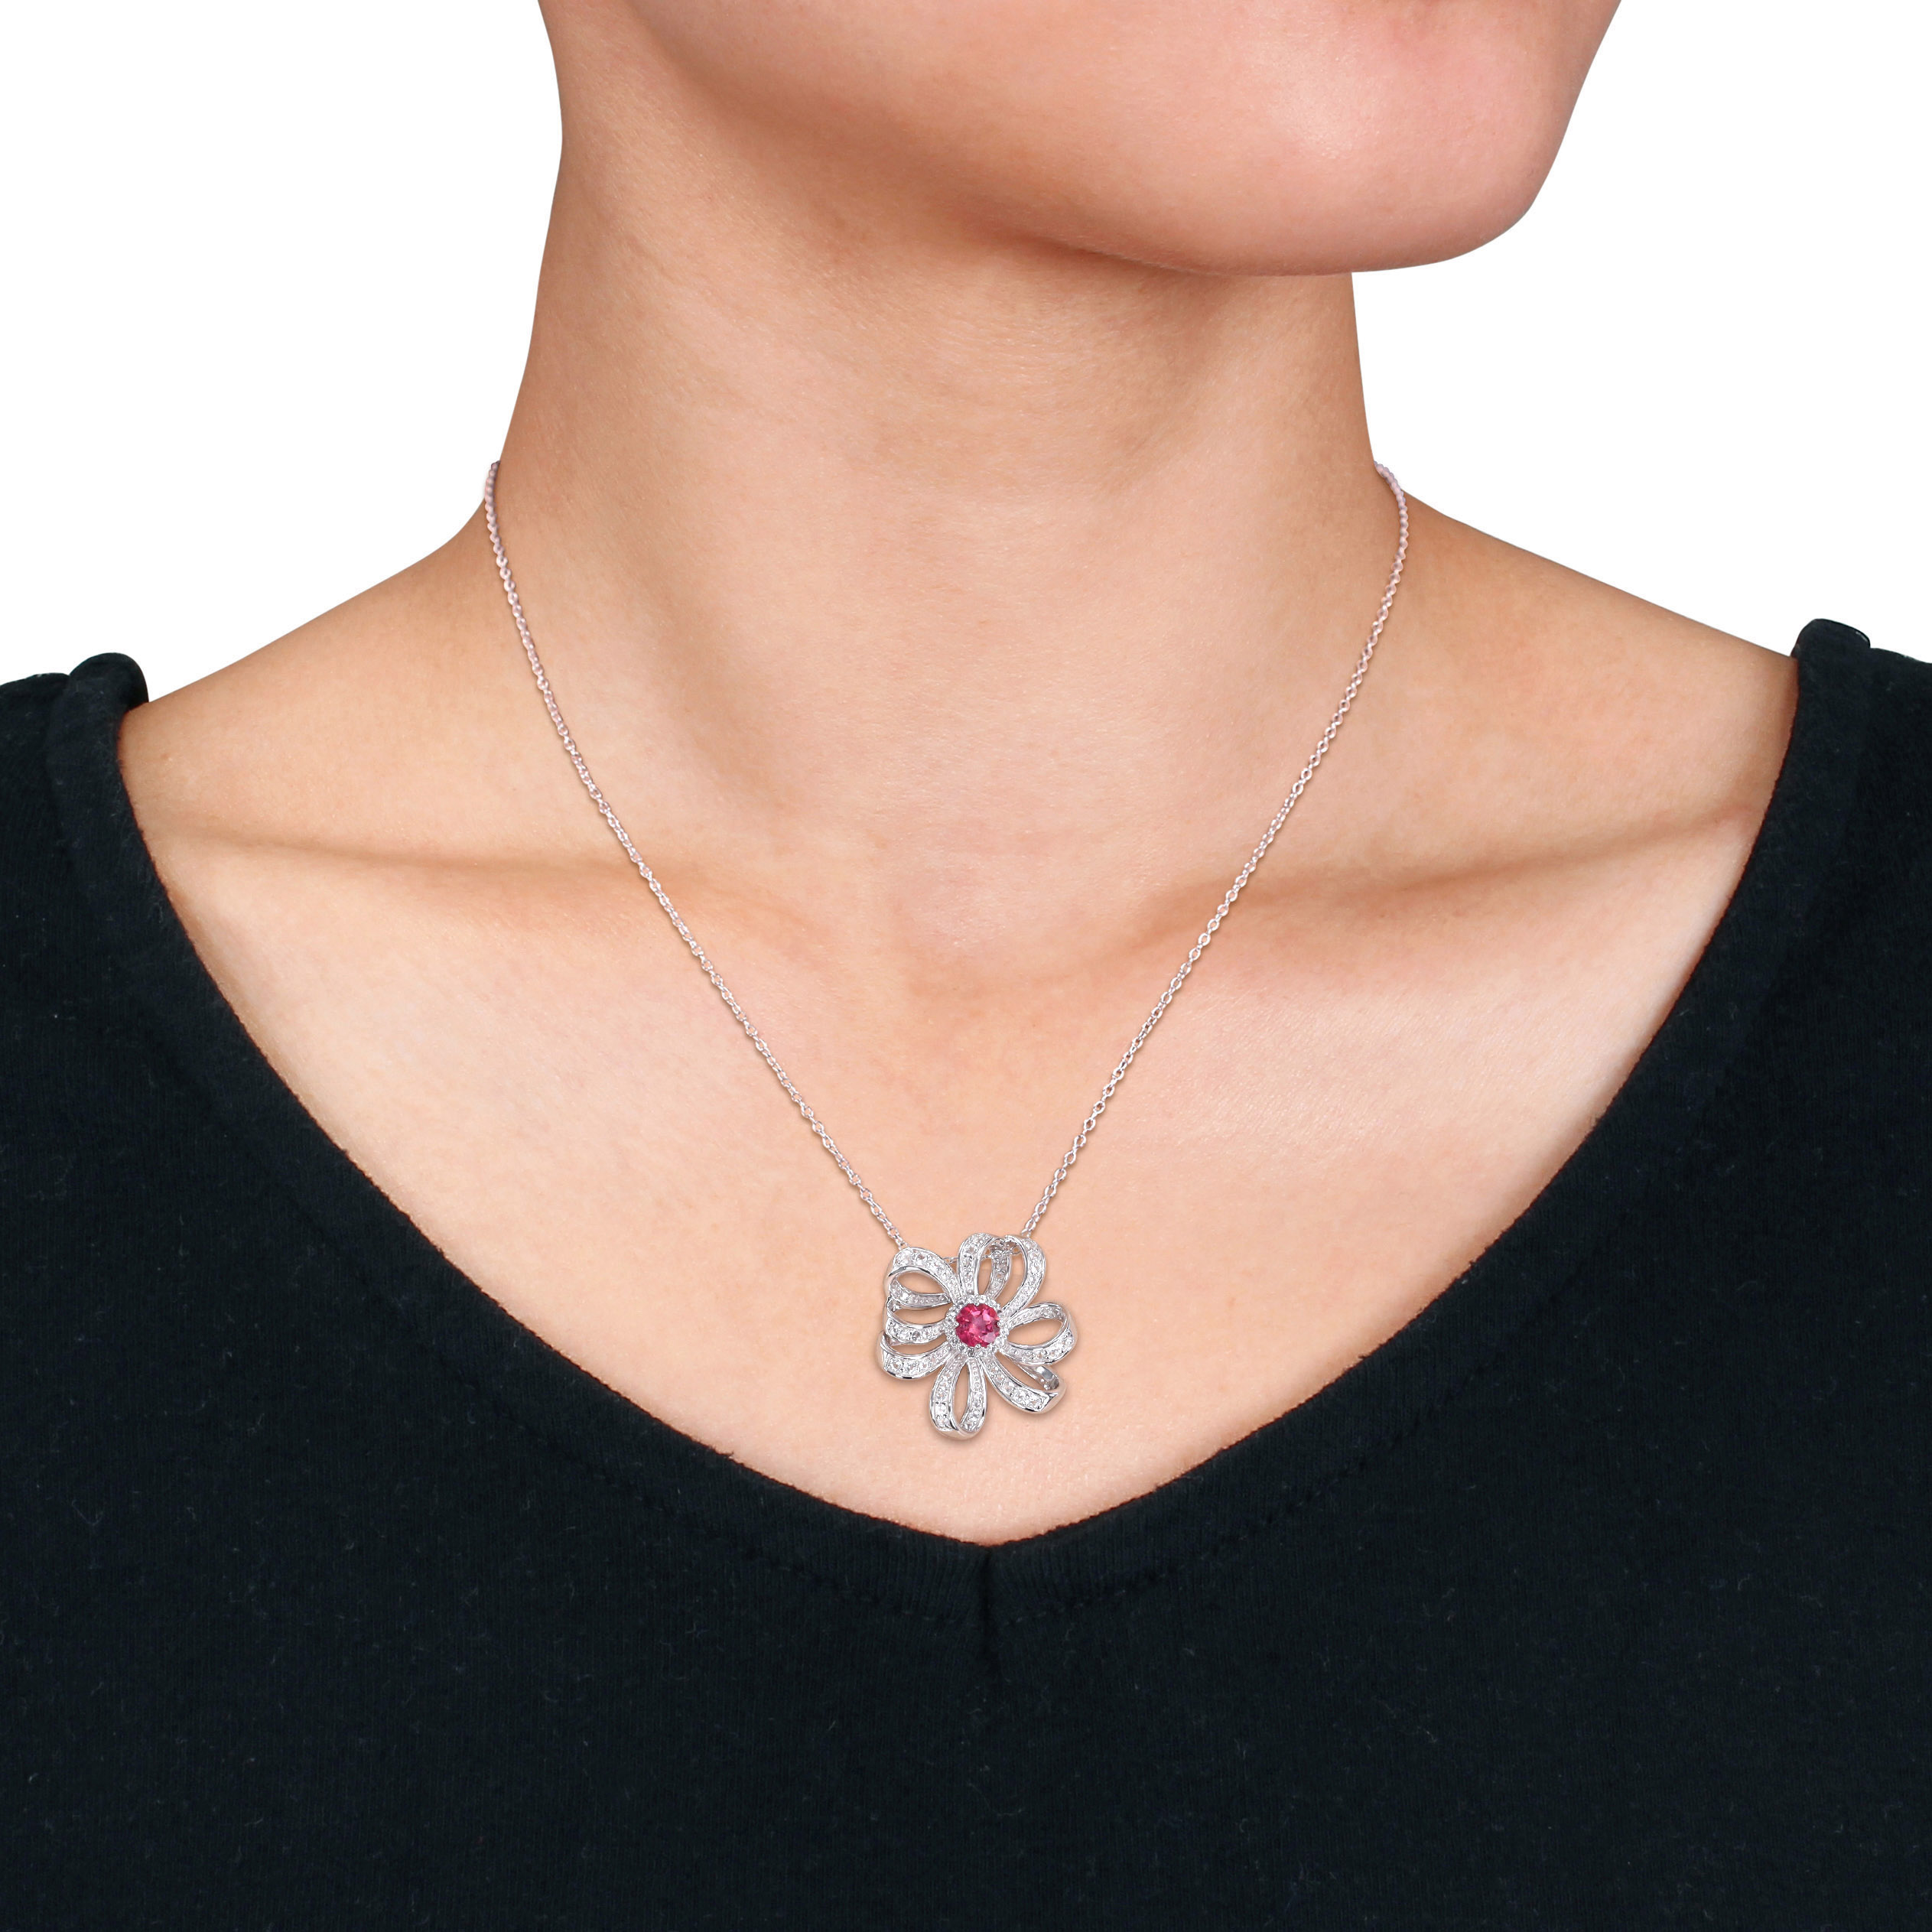 2 3/4 CT TGW Pink Topaz and White Topaz Flower Pendant with Chain in Sterling Silver - 20 in.